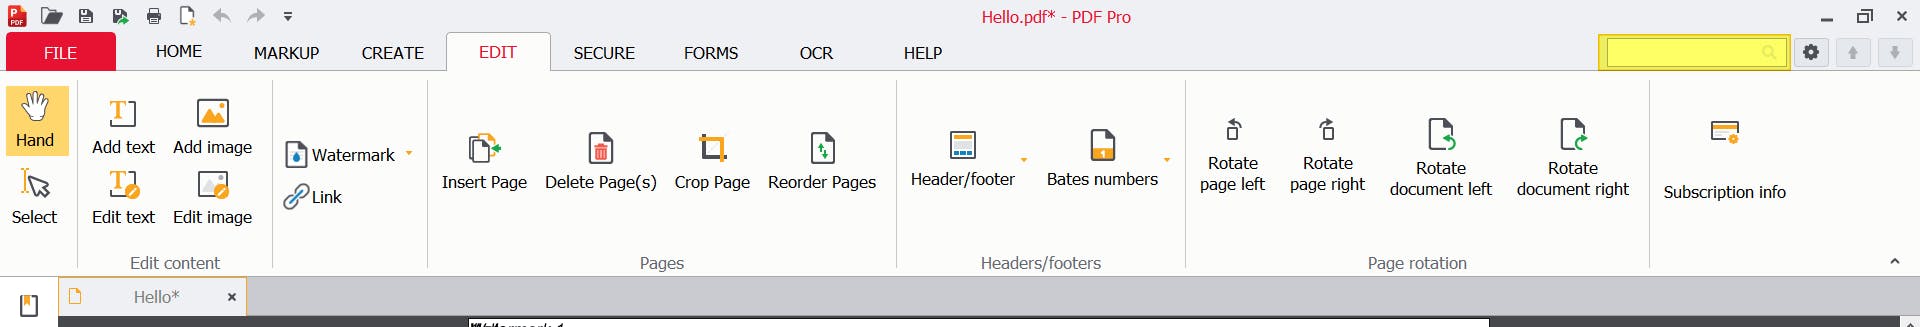 PDF Pro with Search Bar highlighted.